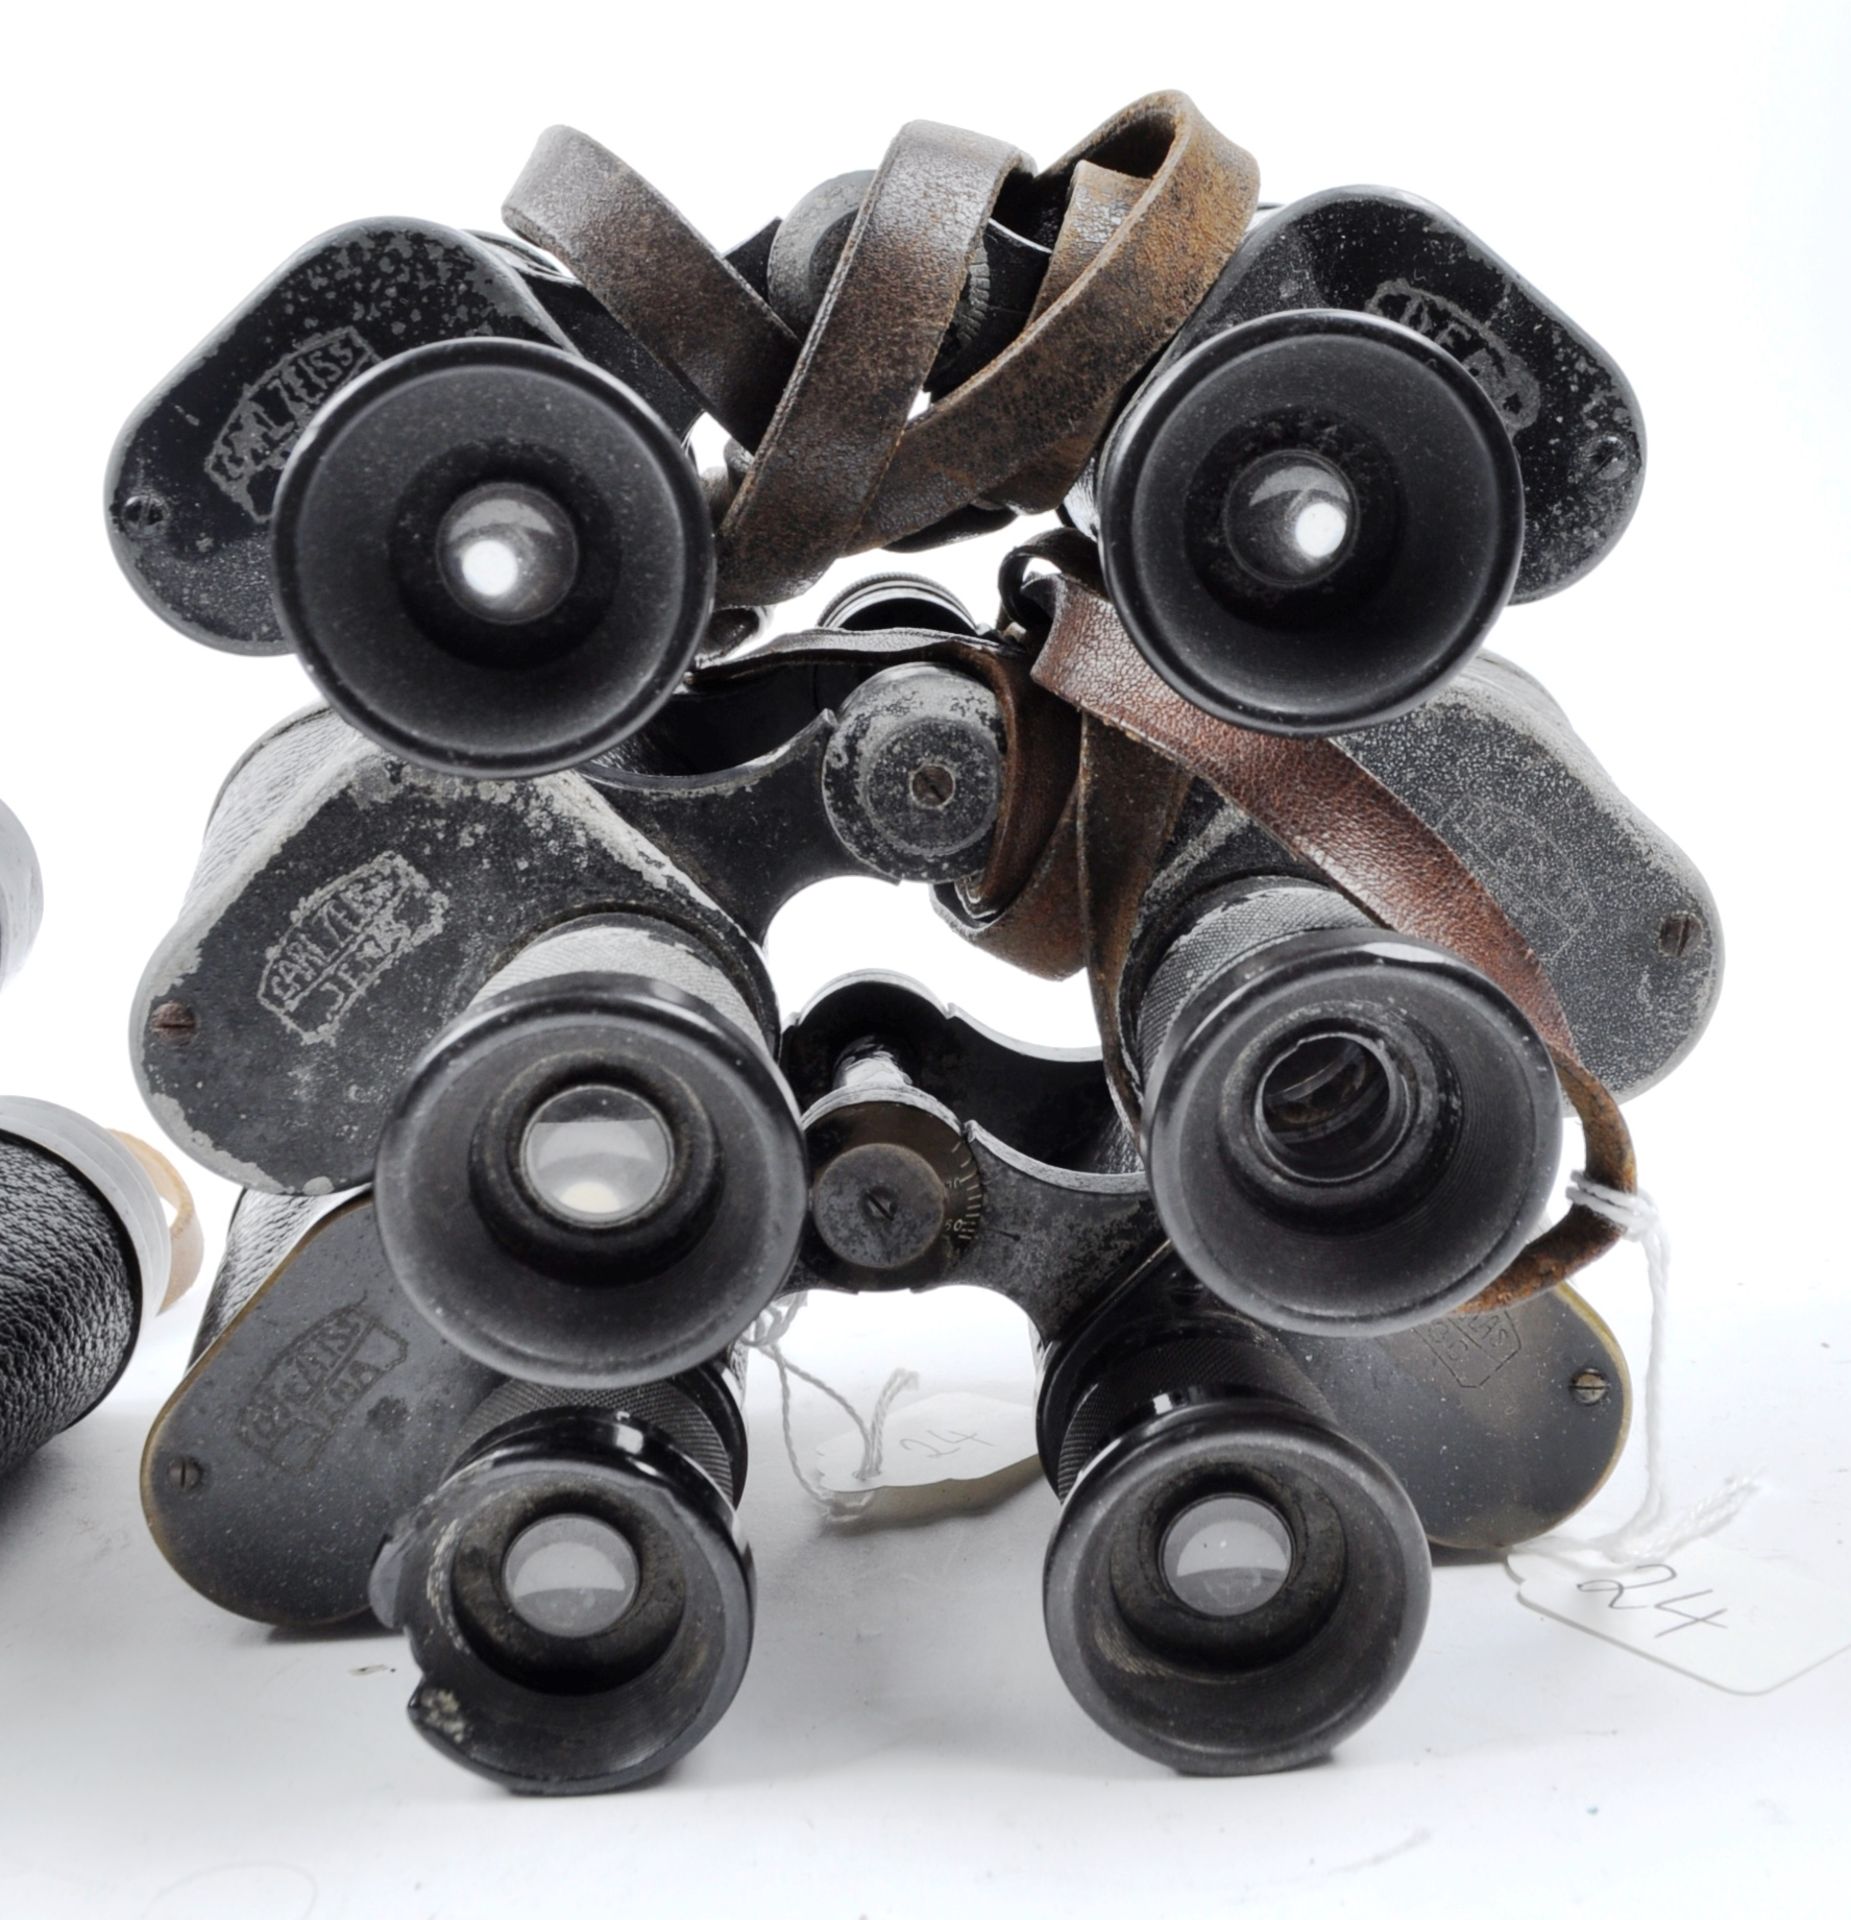 COLLECTION OF CARL ZEISS VINTAGE BINOCULARS INCLUDING MILITARY ISSUE - Image 4 of 5